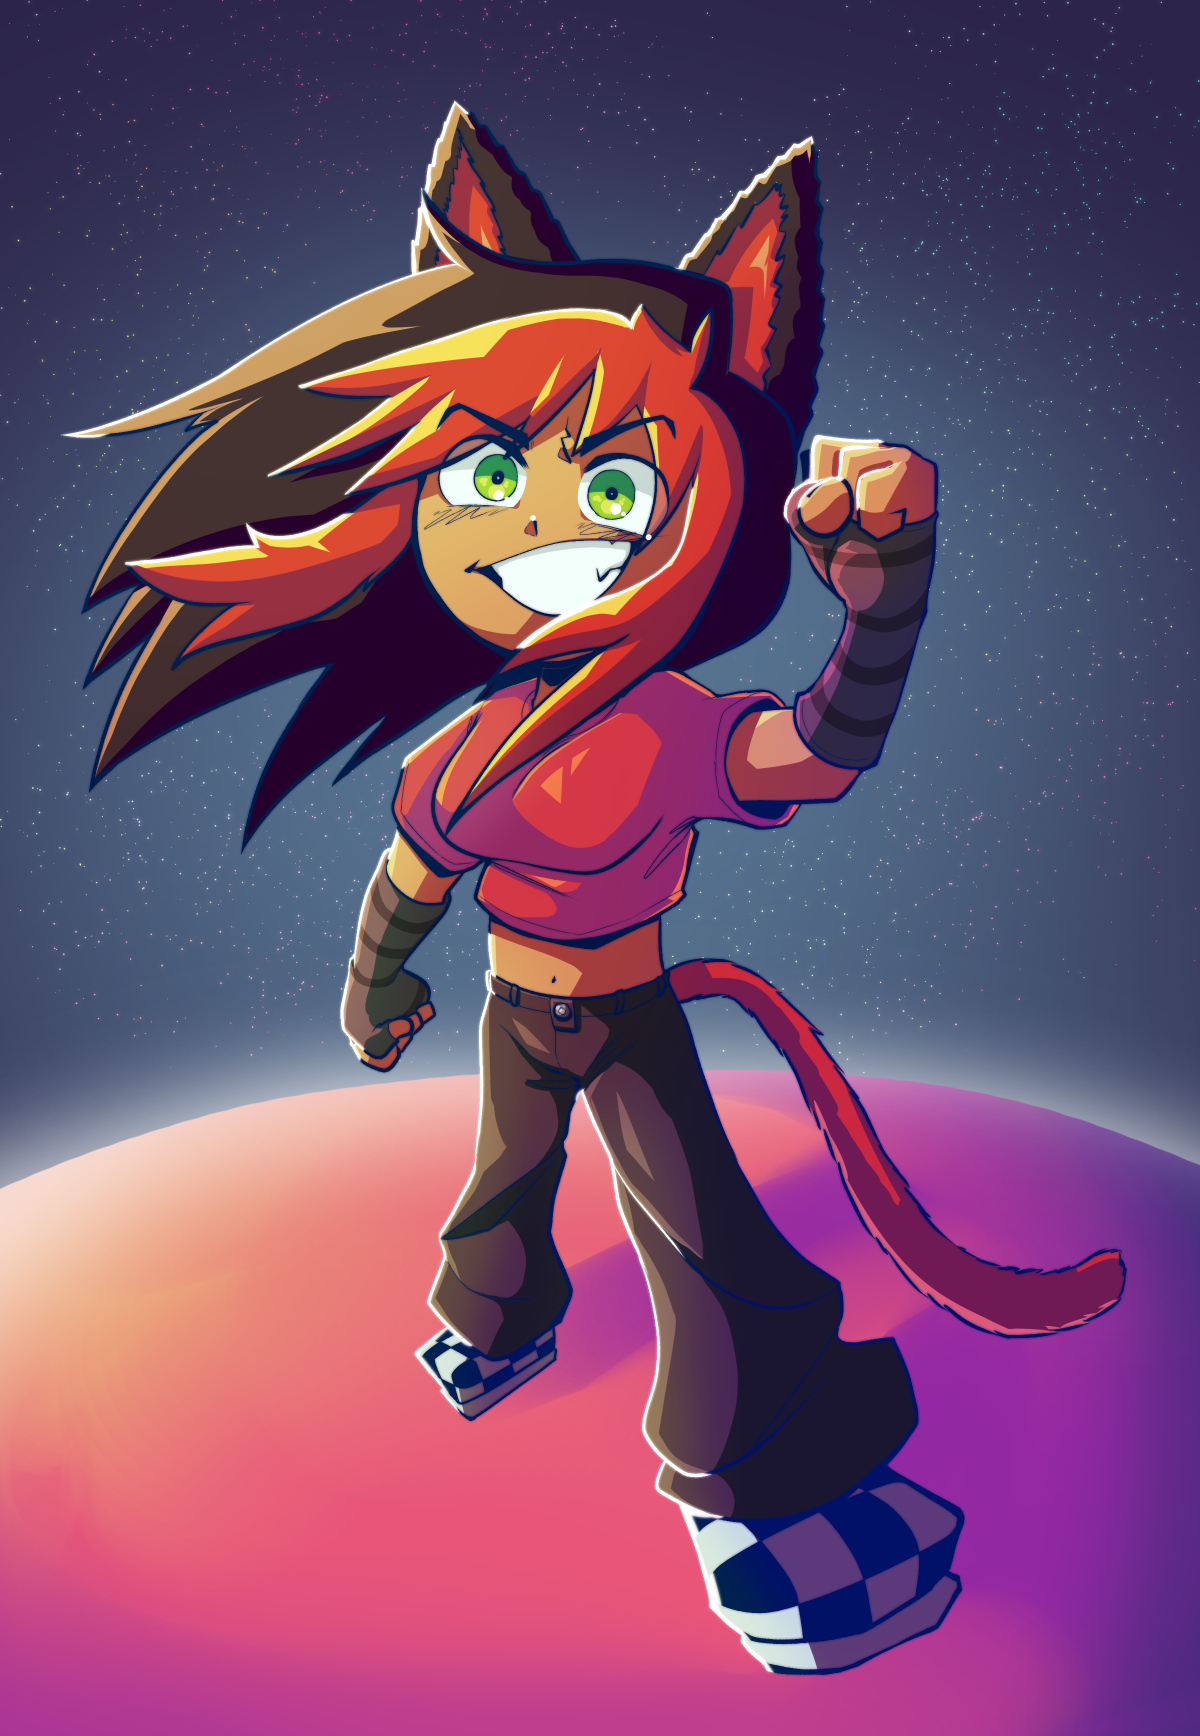 Art for a friend's birthday of her standing on a planet looking cool